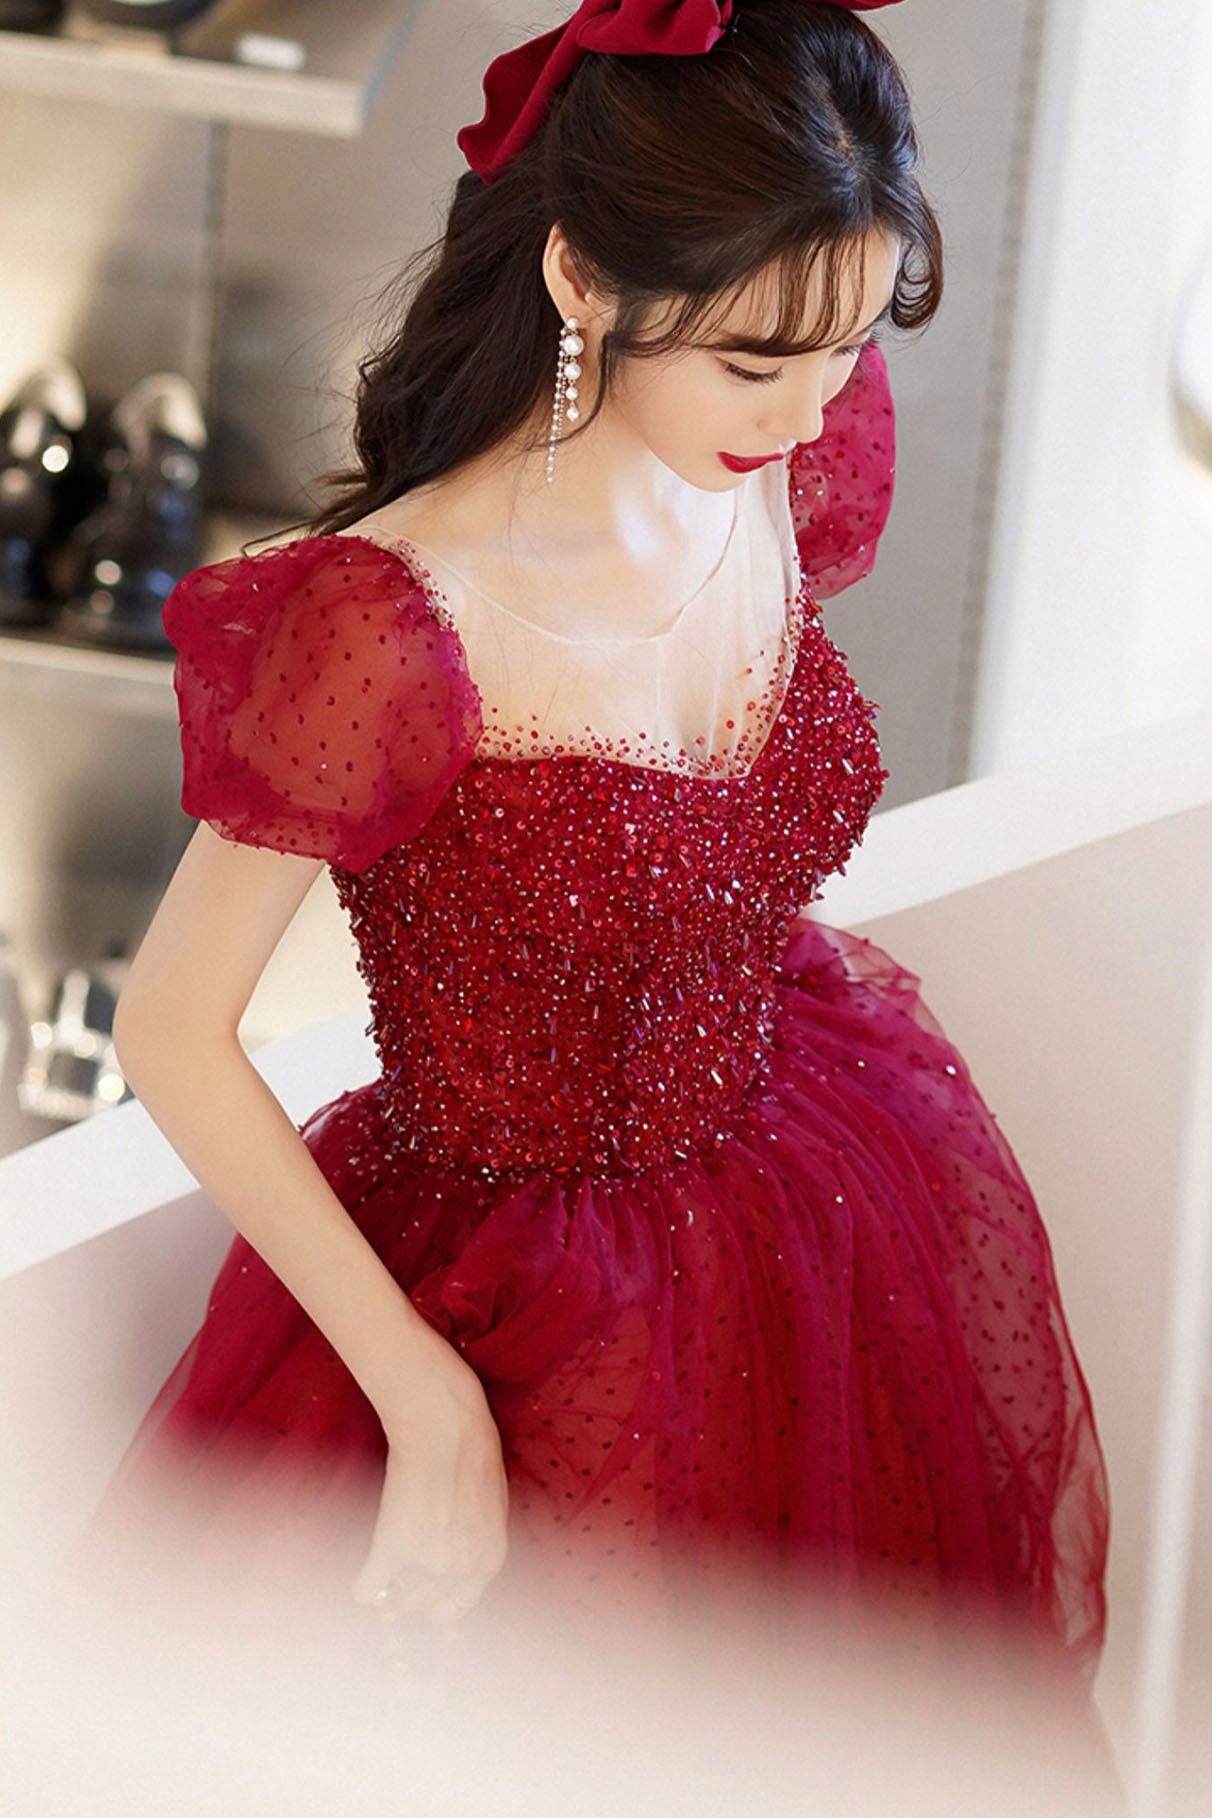 Burgundy Tulle Beaded Long Prom Dress, Beautiful A-Line Party Dress